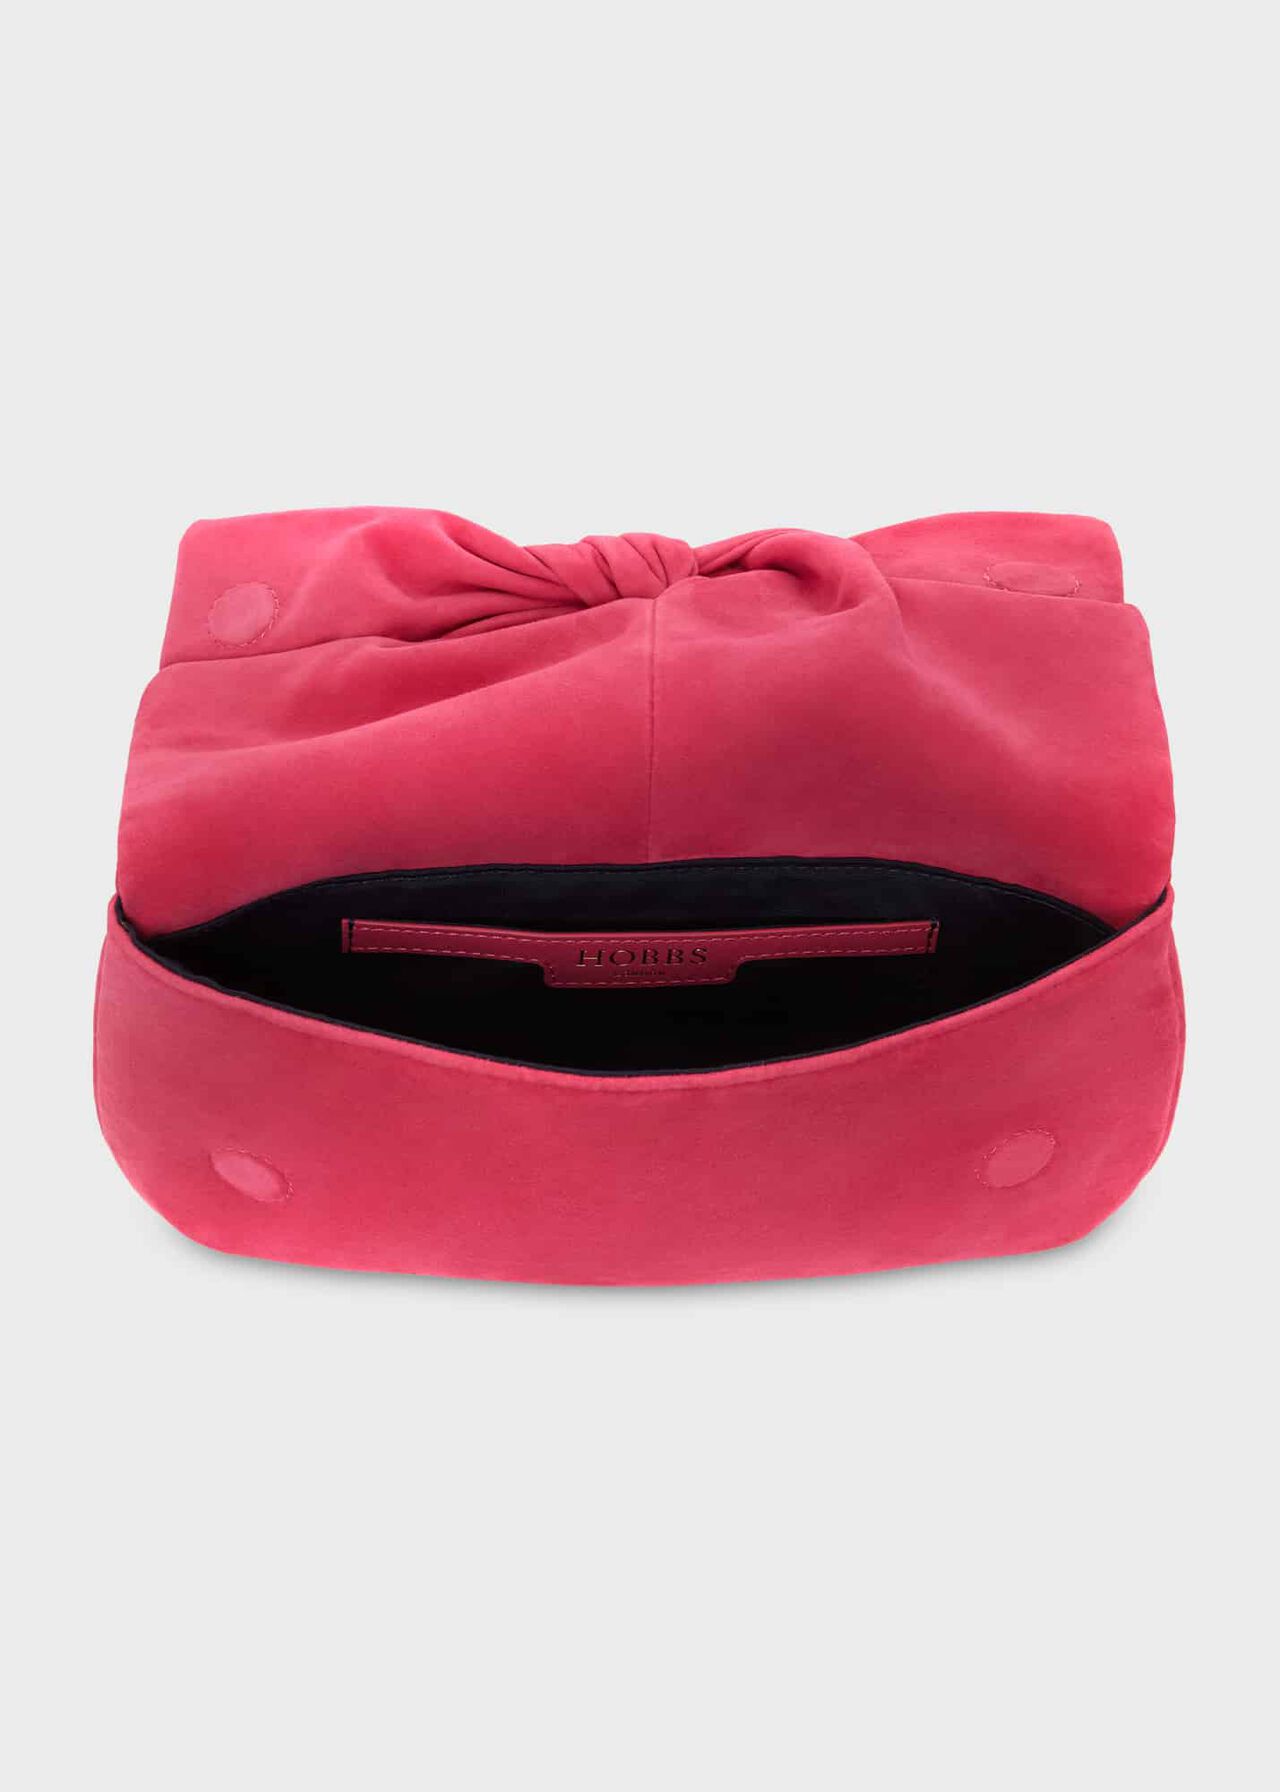 Milly Bow Clutch, Bright Pink, hi-res